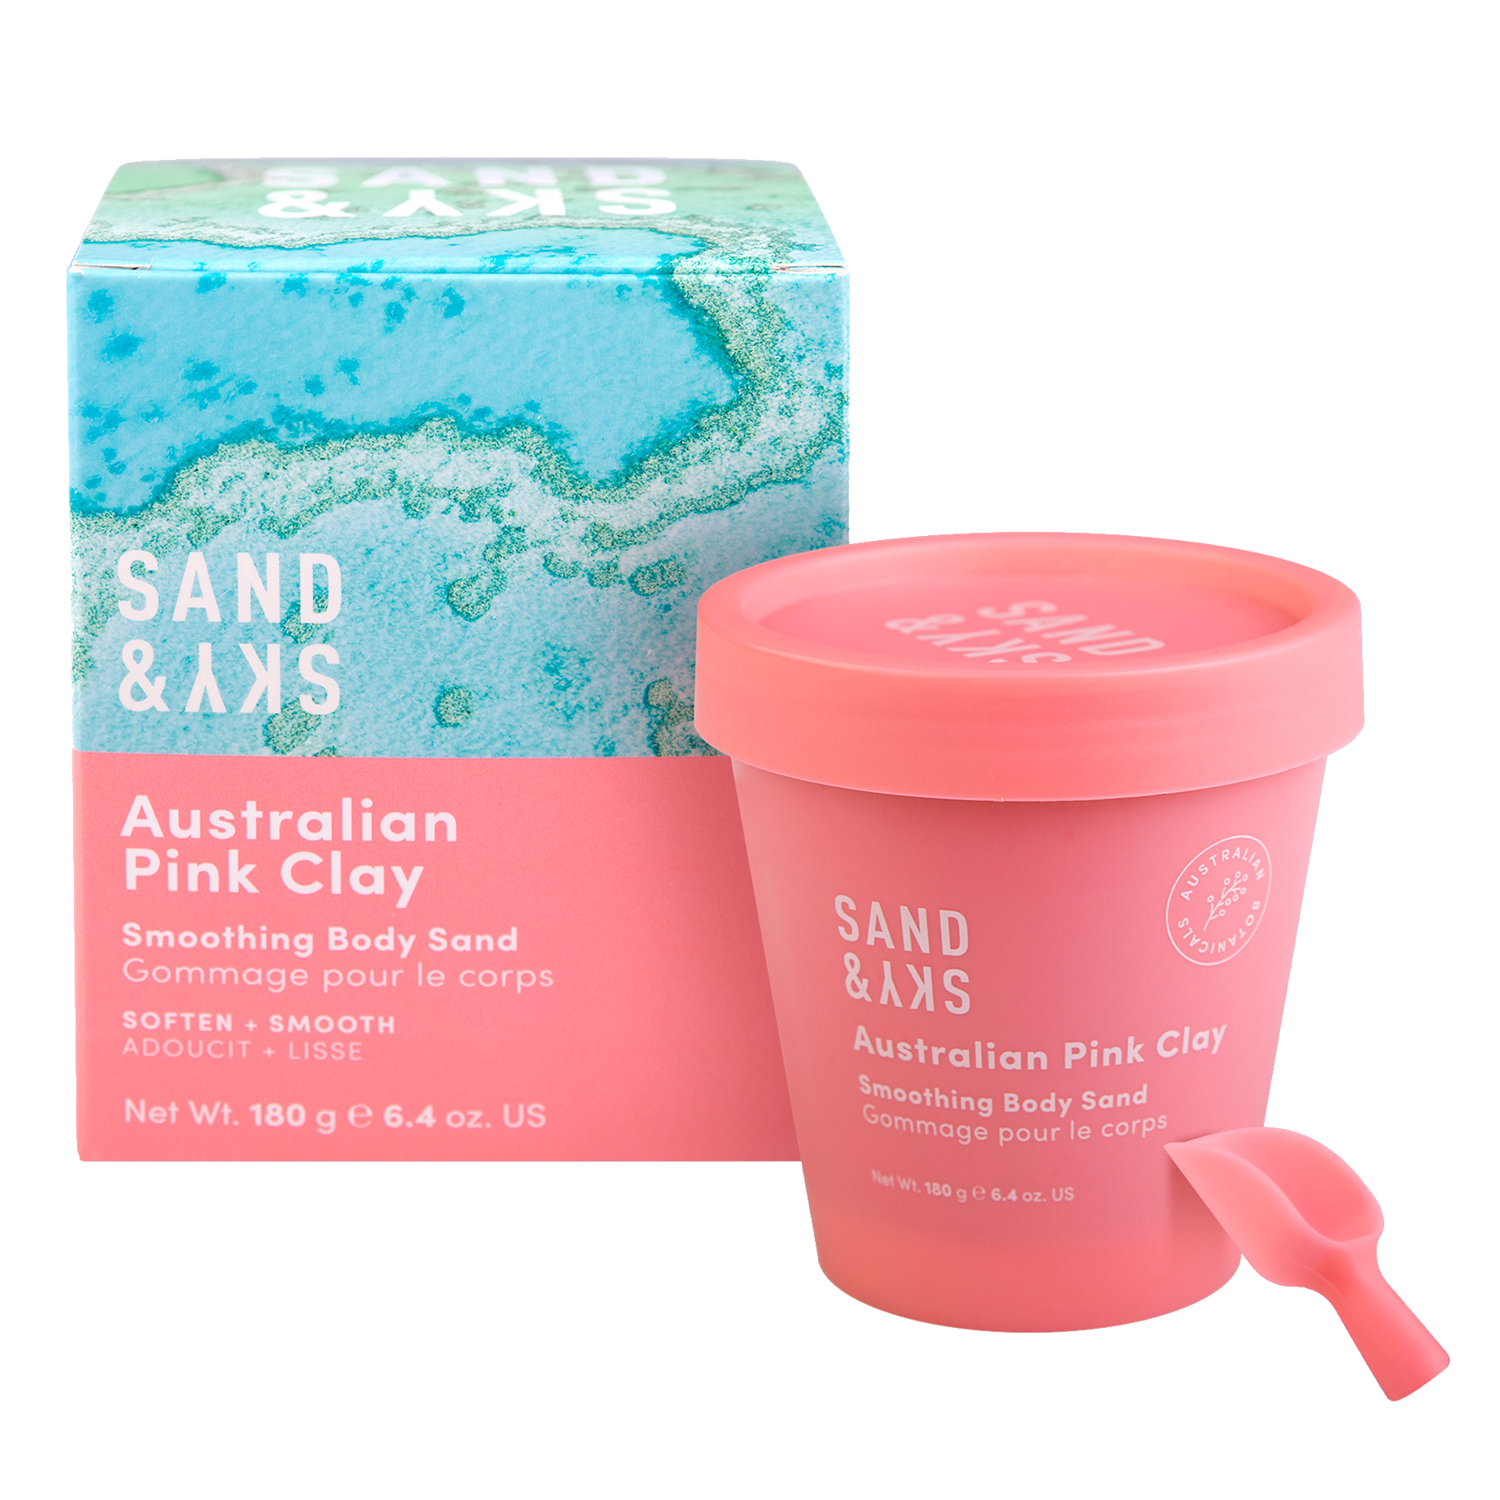 Sand & Sky Australian Pink Clay - Smoothing Body Sand Sand & Sky Australian Pink Clay - Smoothing Body Sand 1